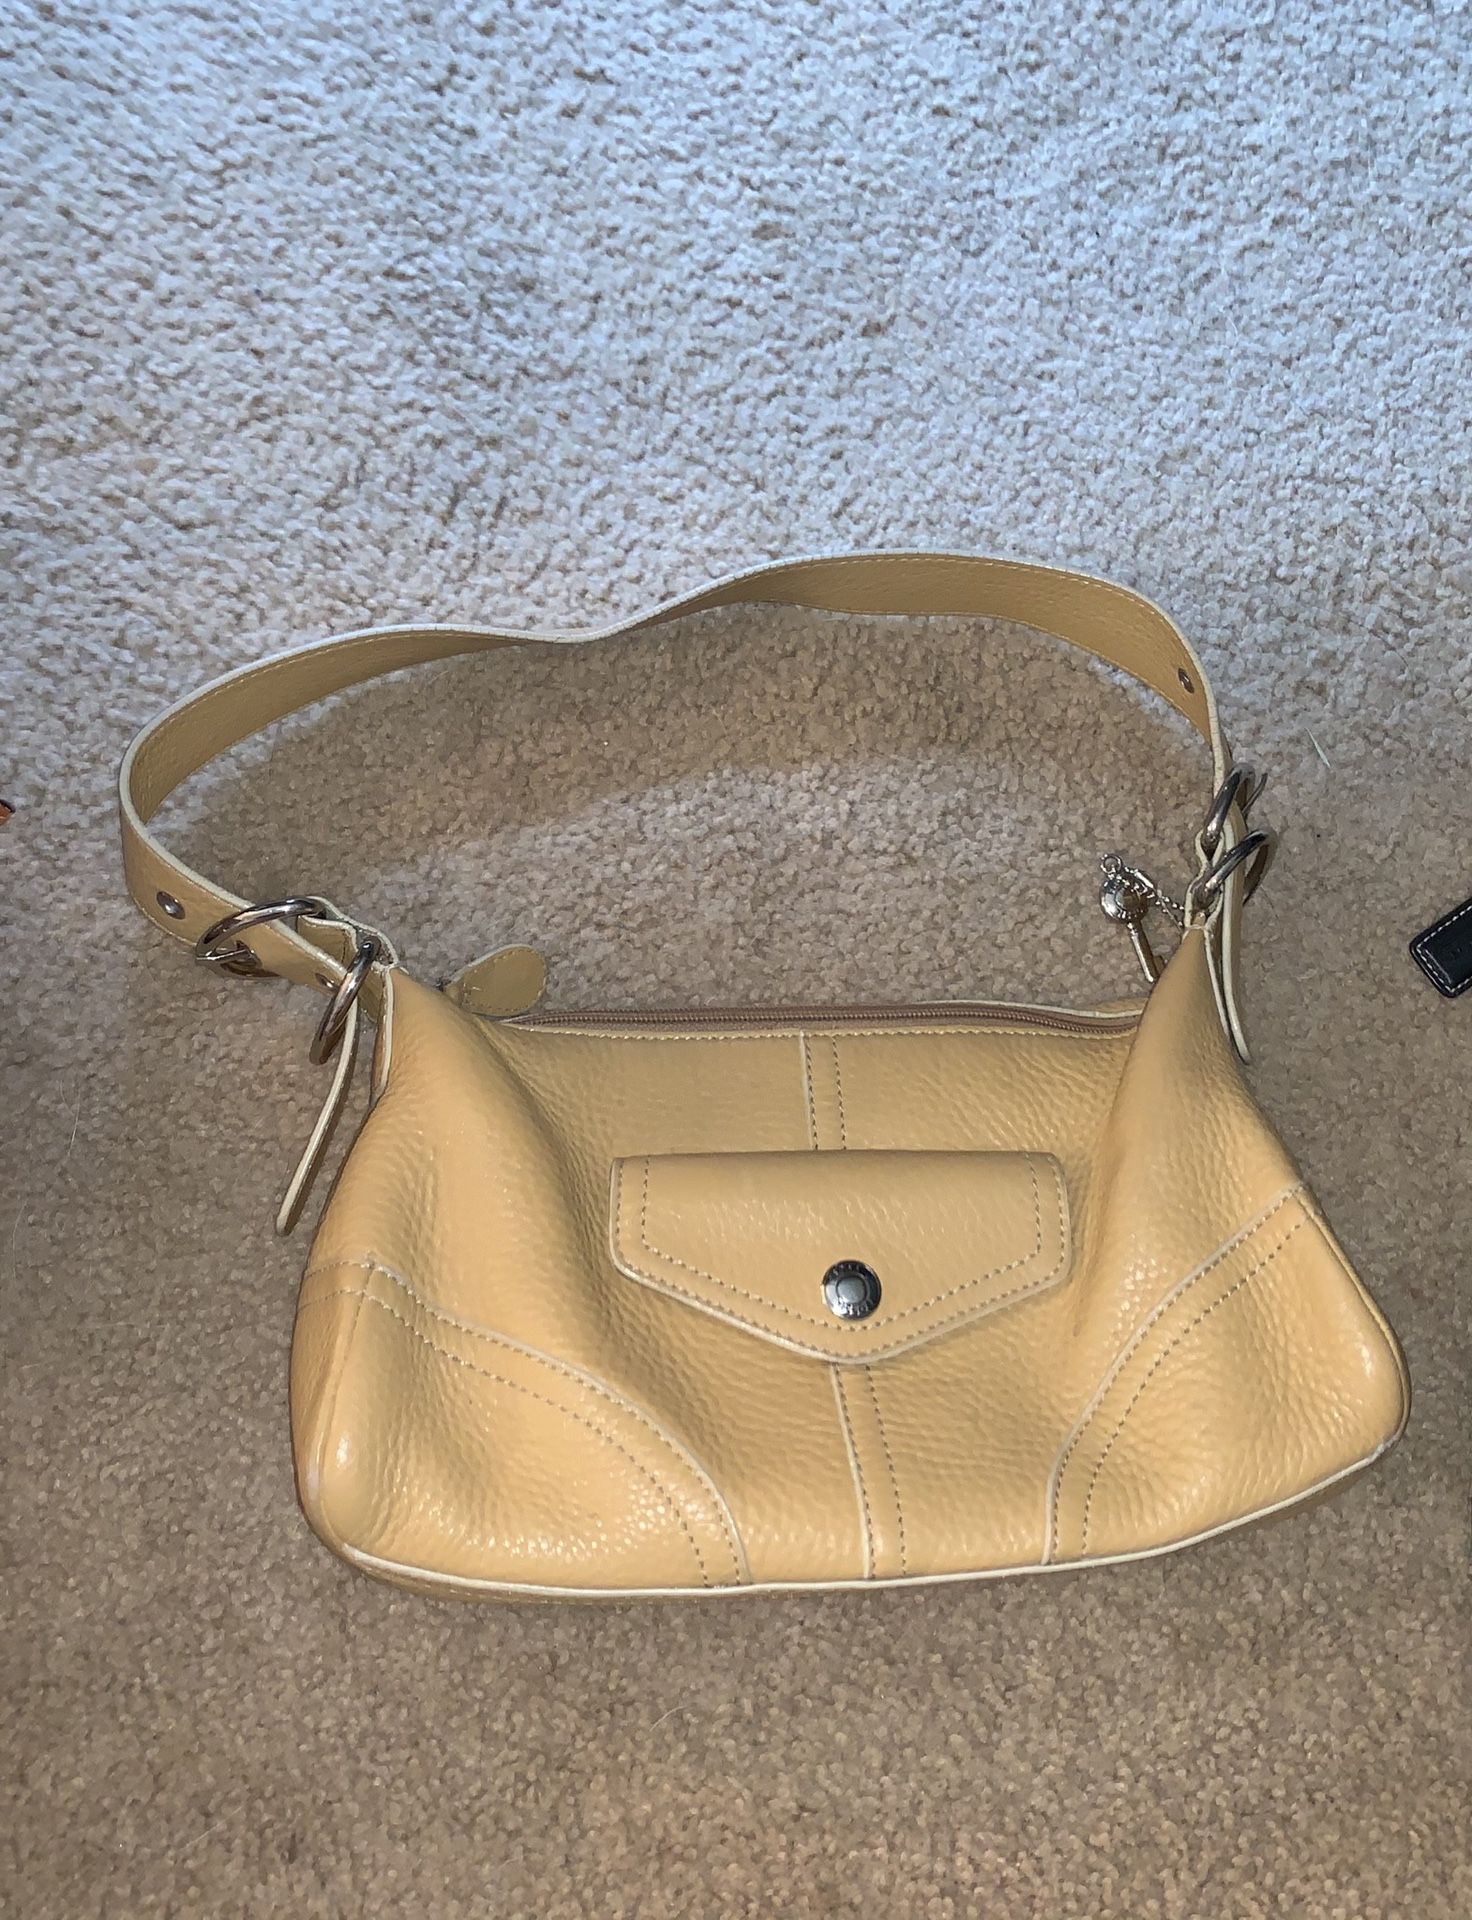 Fossil small shoulder bag leather